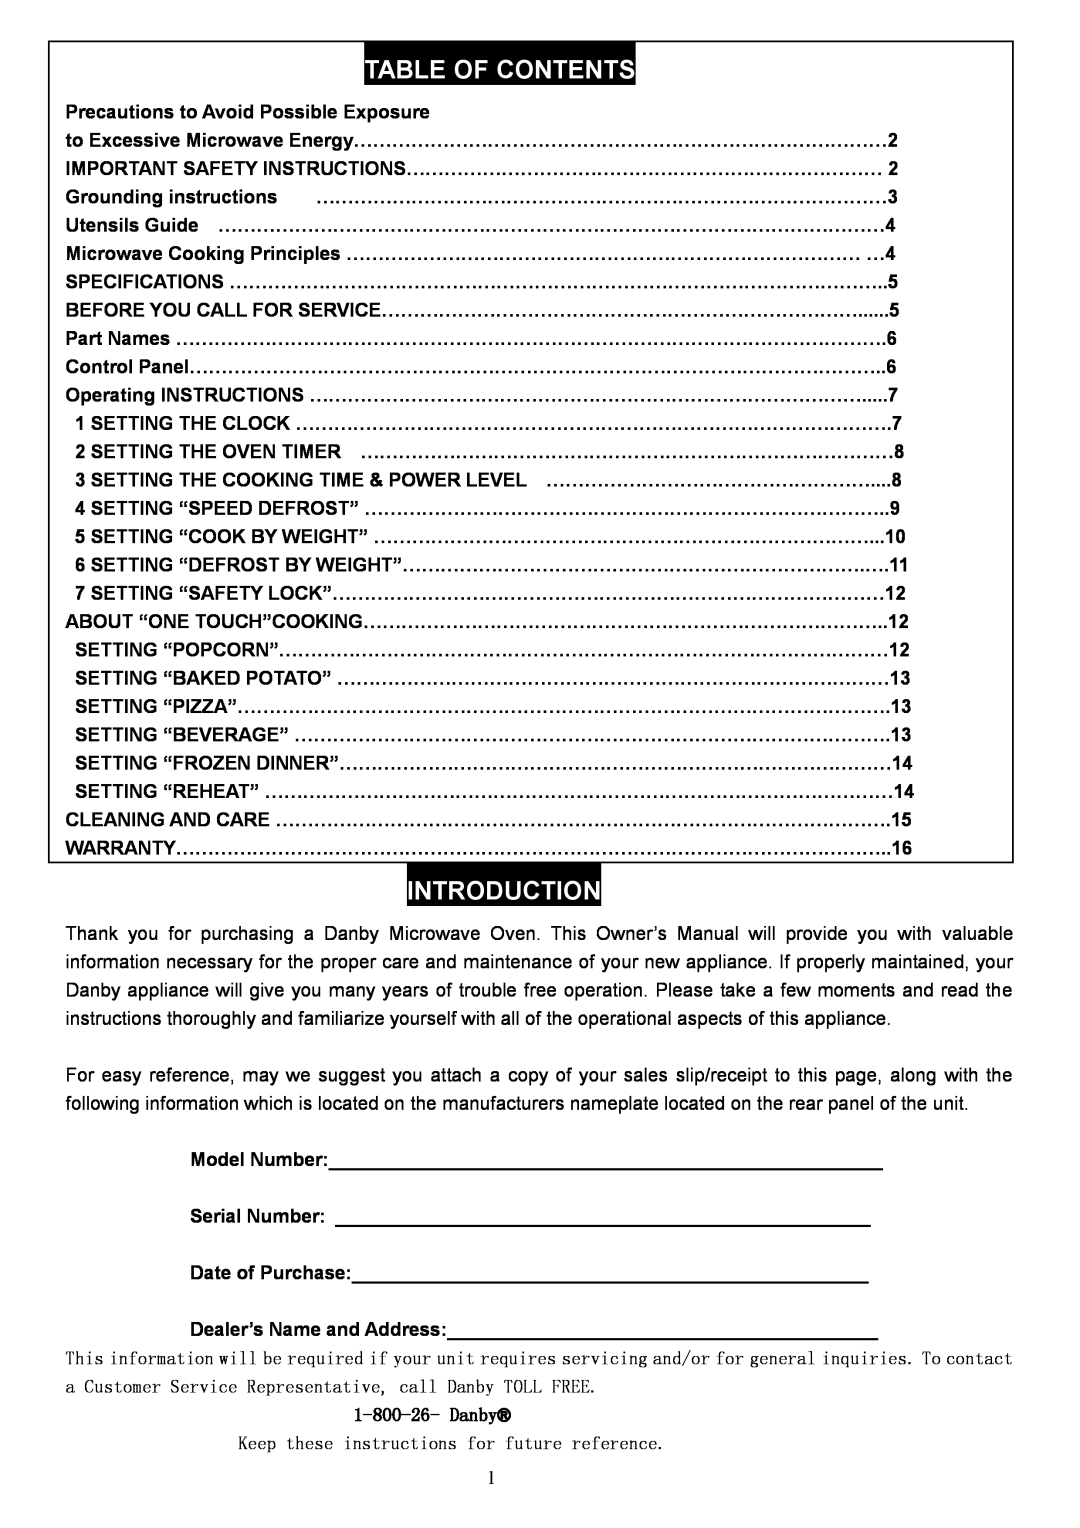 Danby DMW1147SS owner manual Table Of Contents, Introduction, Danby Keep these instructions for future reference 